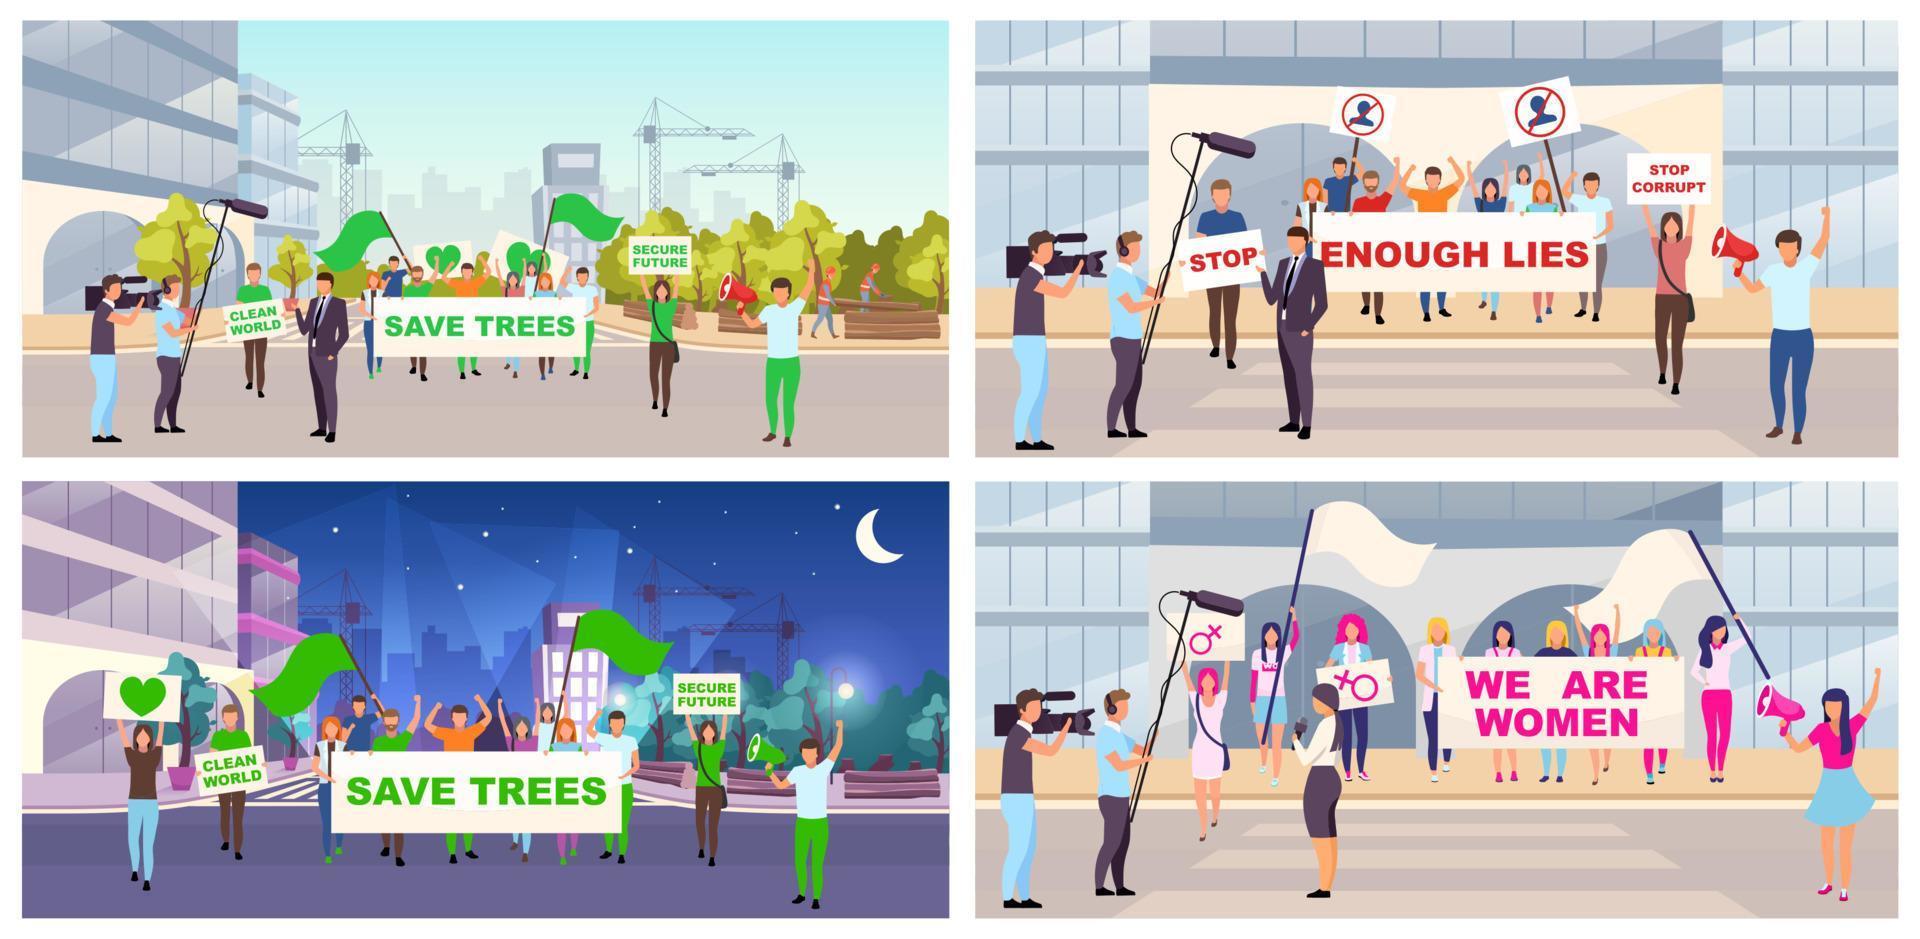 Social protests flat vector illustrations set. Feminist movement, save trees demonstration. Protesters, activists with placards cartoon characters. Street protest actions, meetings, manifestation